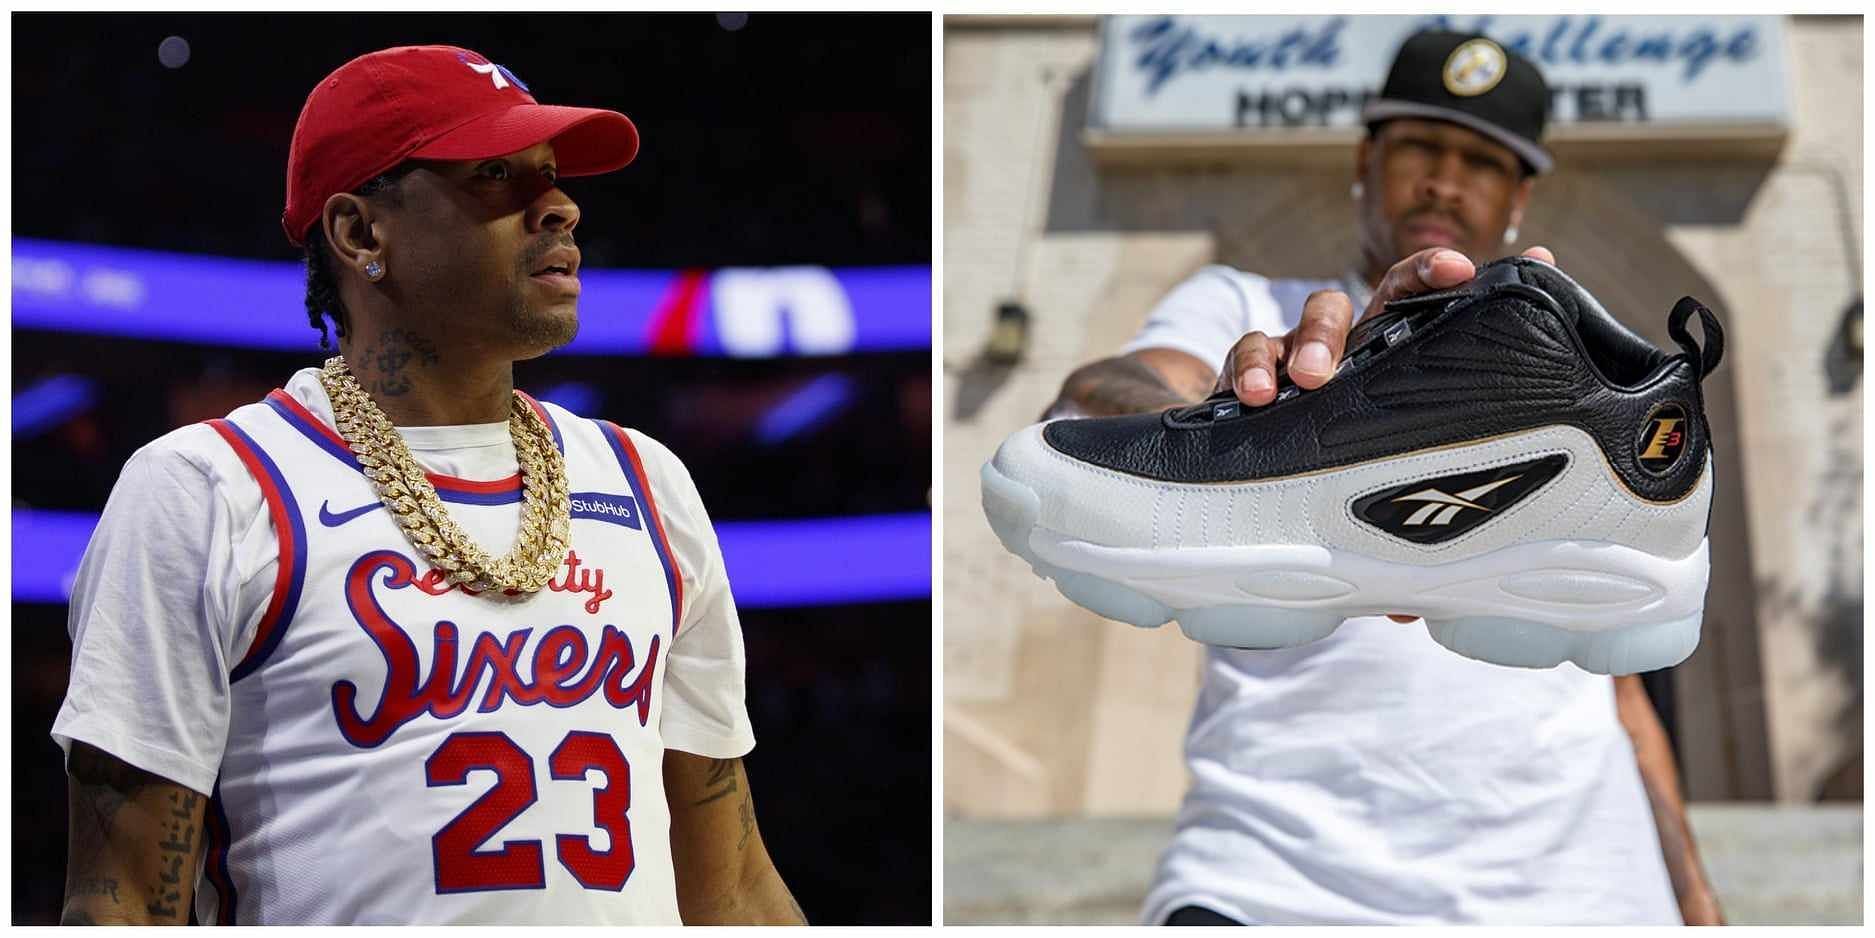 Allen Iverson becomes Vice President of Basketball in major shoe brand Reebok